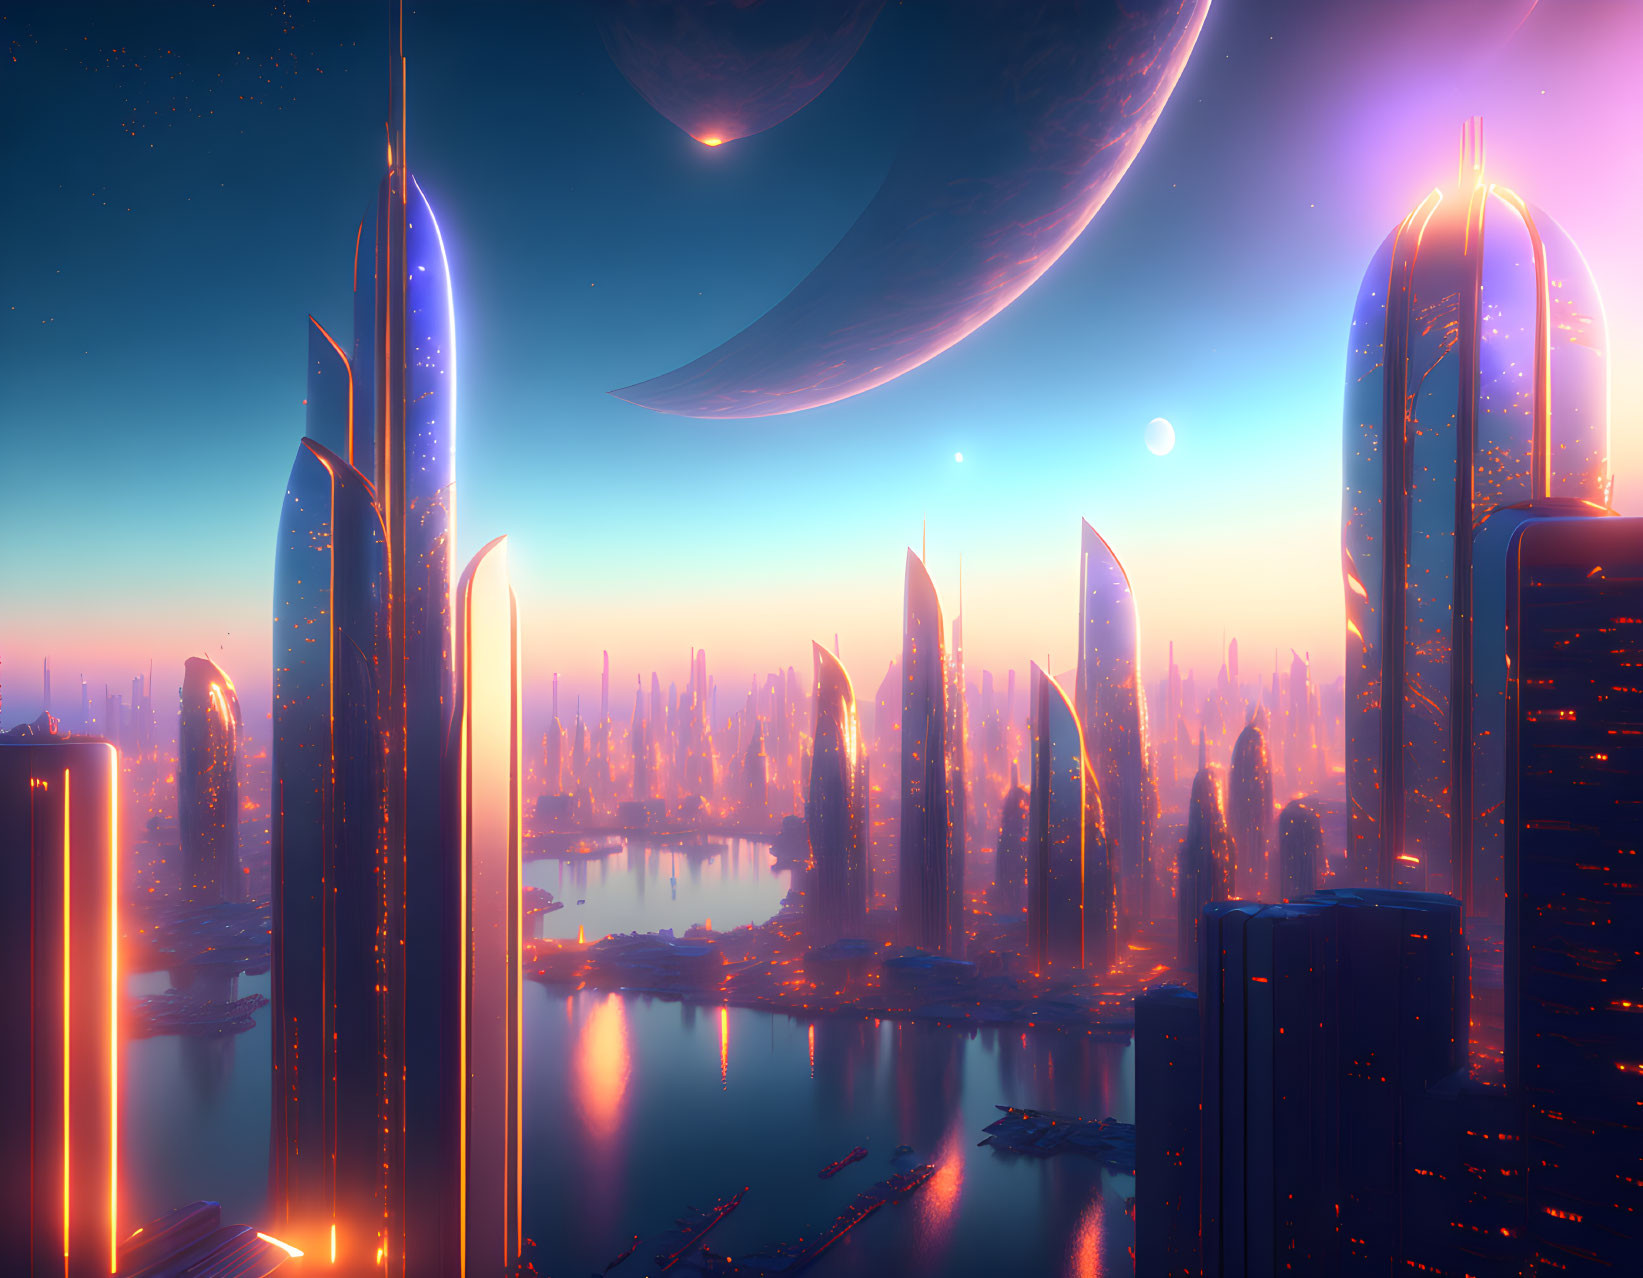 Futuristic city skyline at dusk with neon lights, skyscrapers, and celestial bodies reflecting on